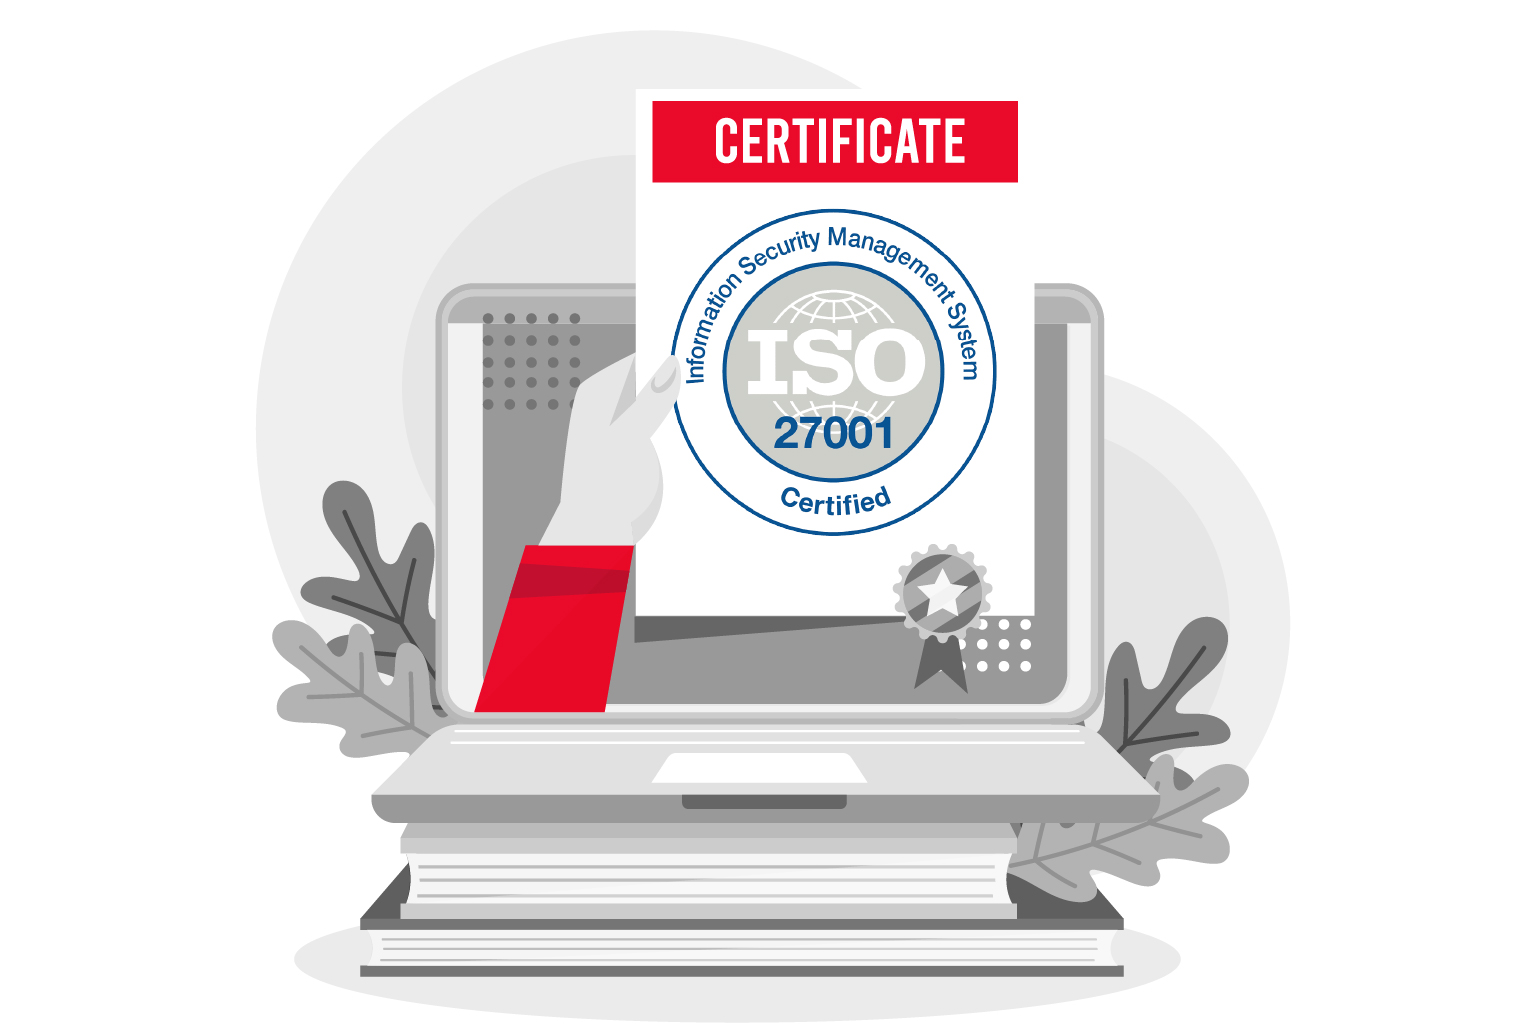 We are proud to announce that Concise Software is ISO/IEC 27001:2017 certified